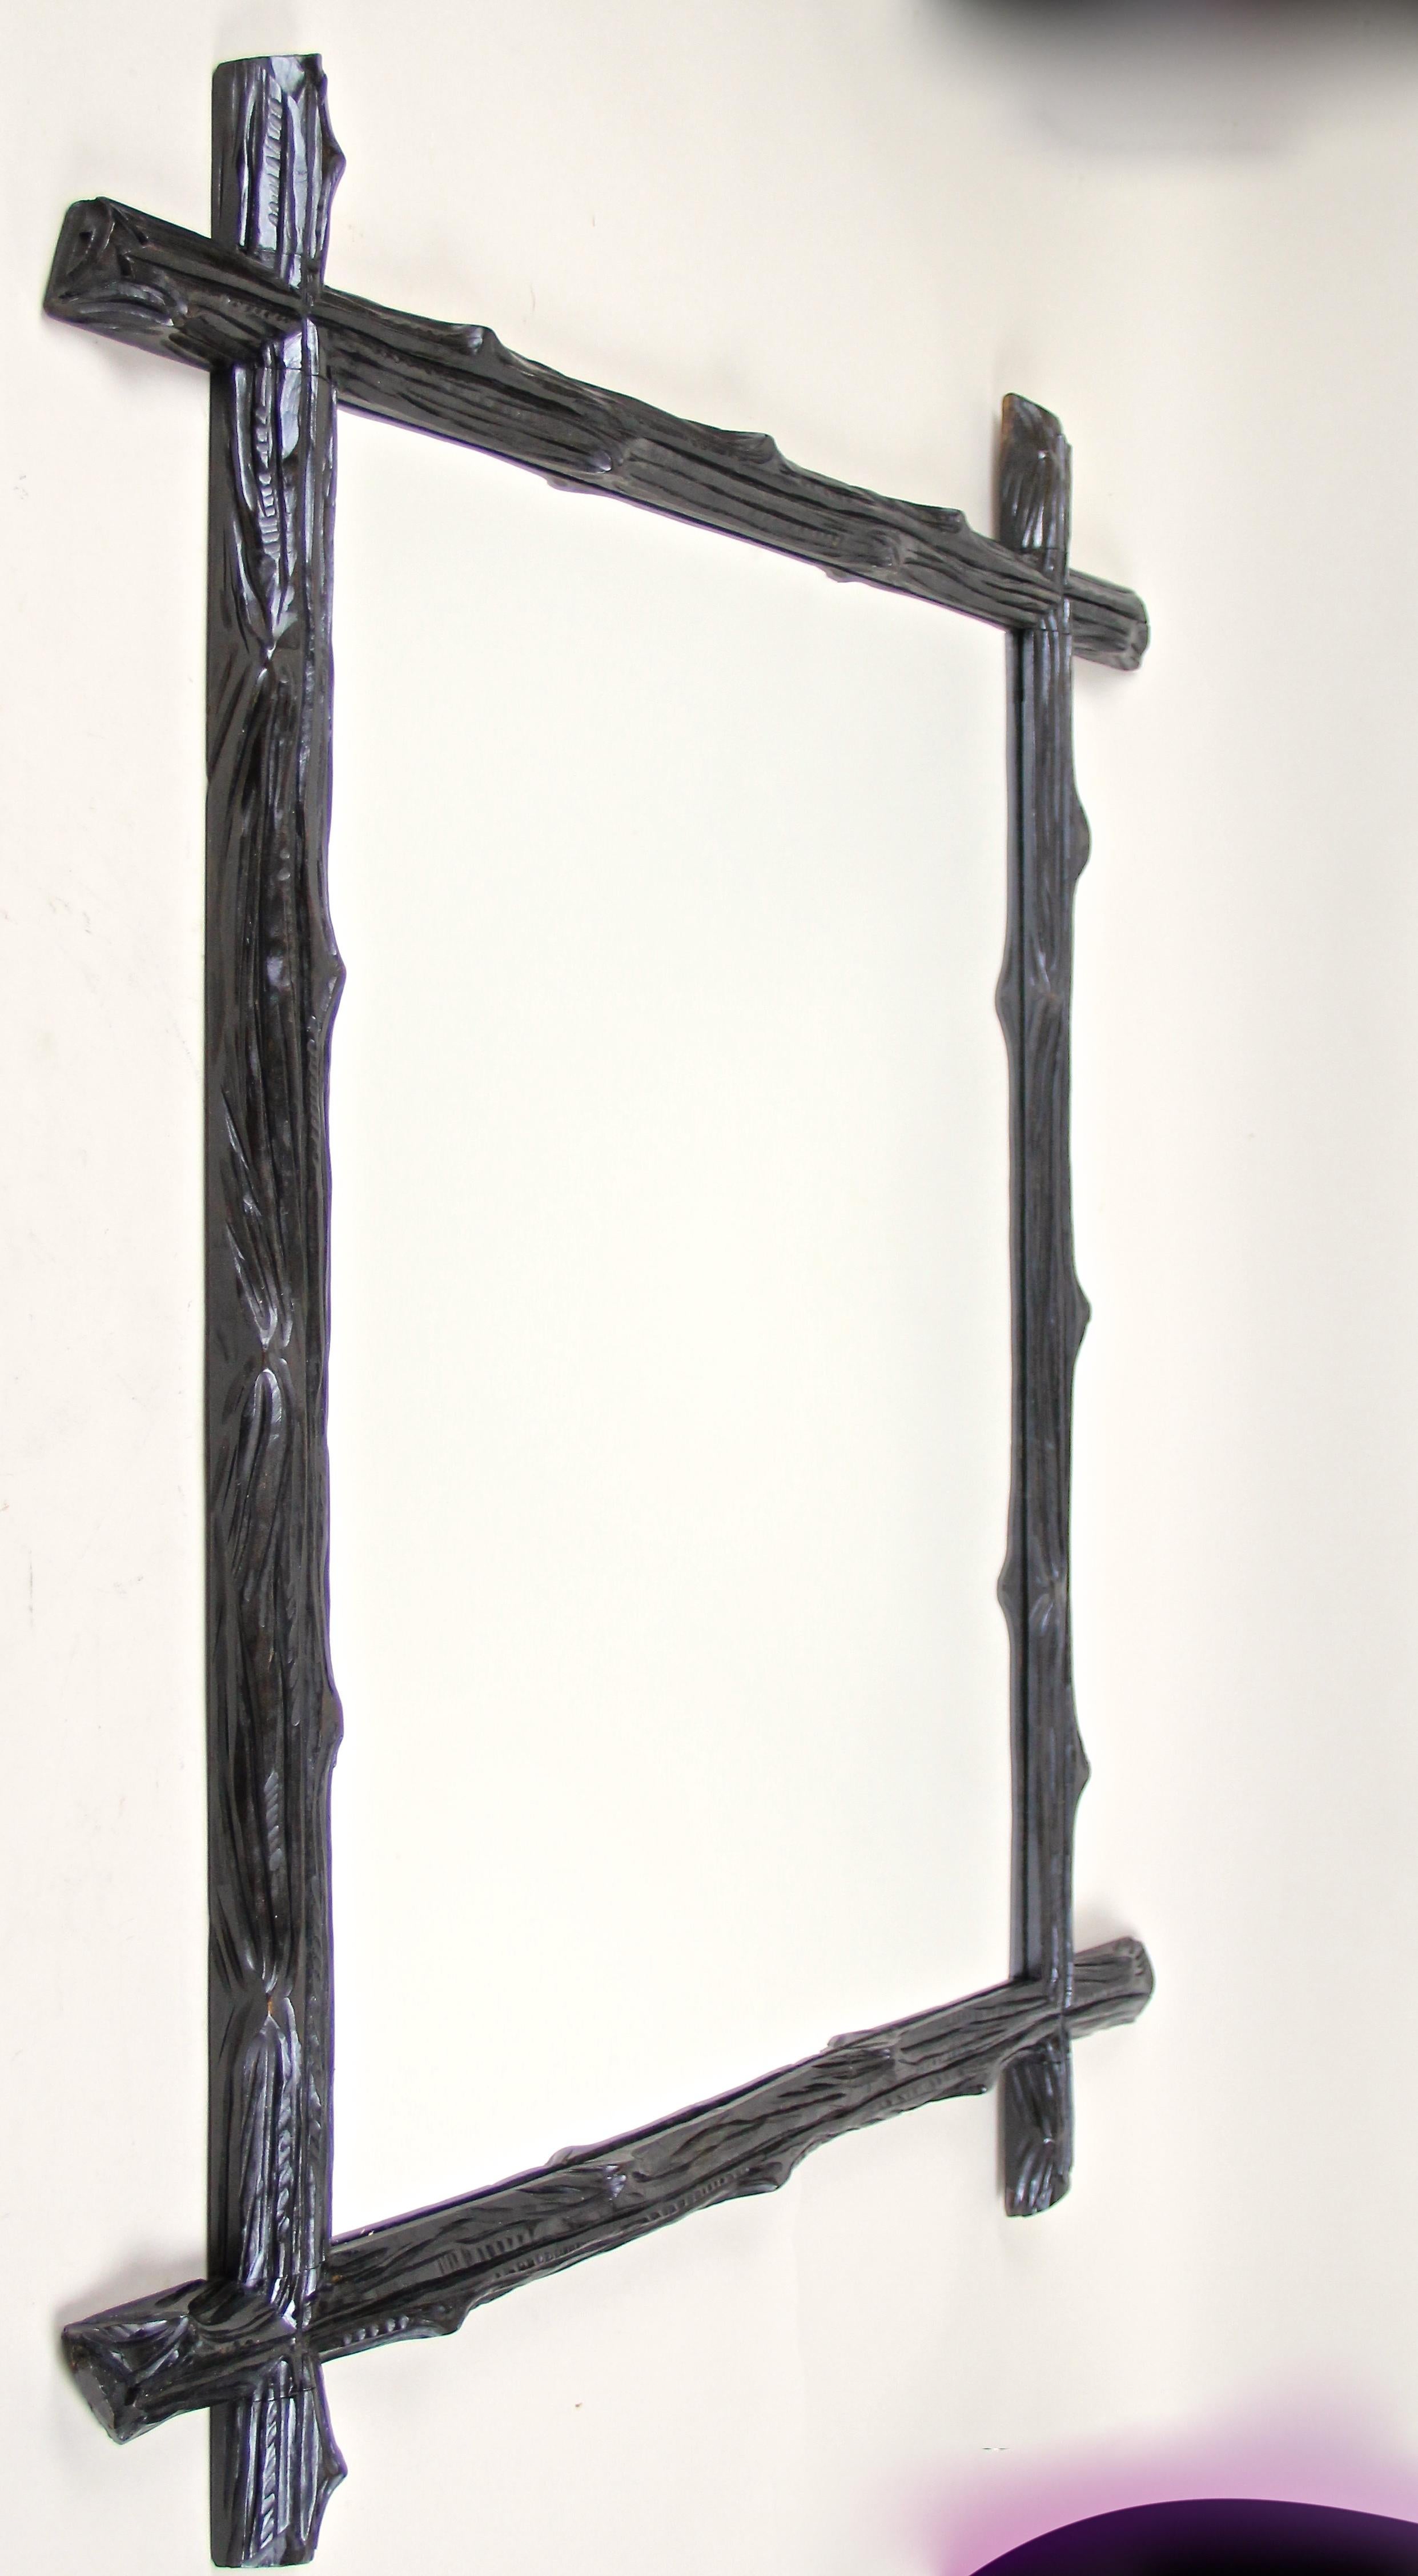 Large rustic designed Black Forest wall mirror from Austria, circa 1880. This antique wall mirror impresses with a simple but elegant 